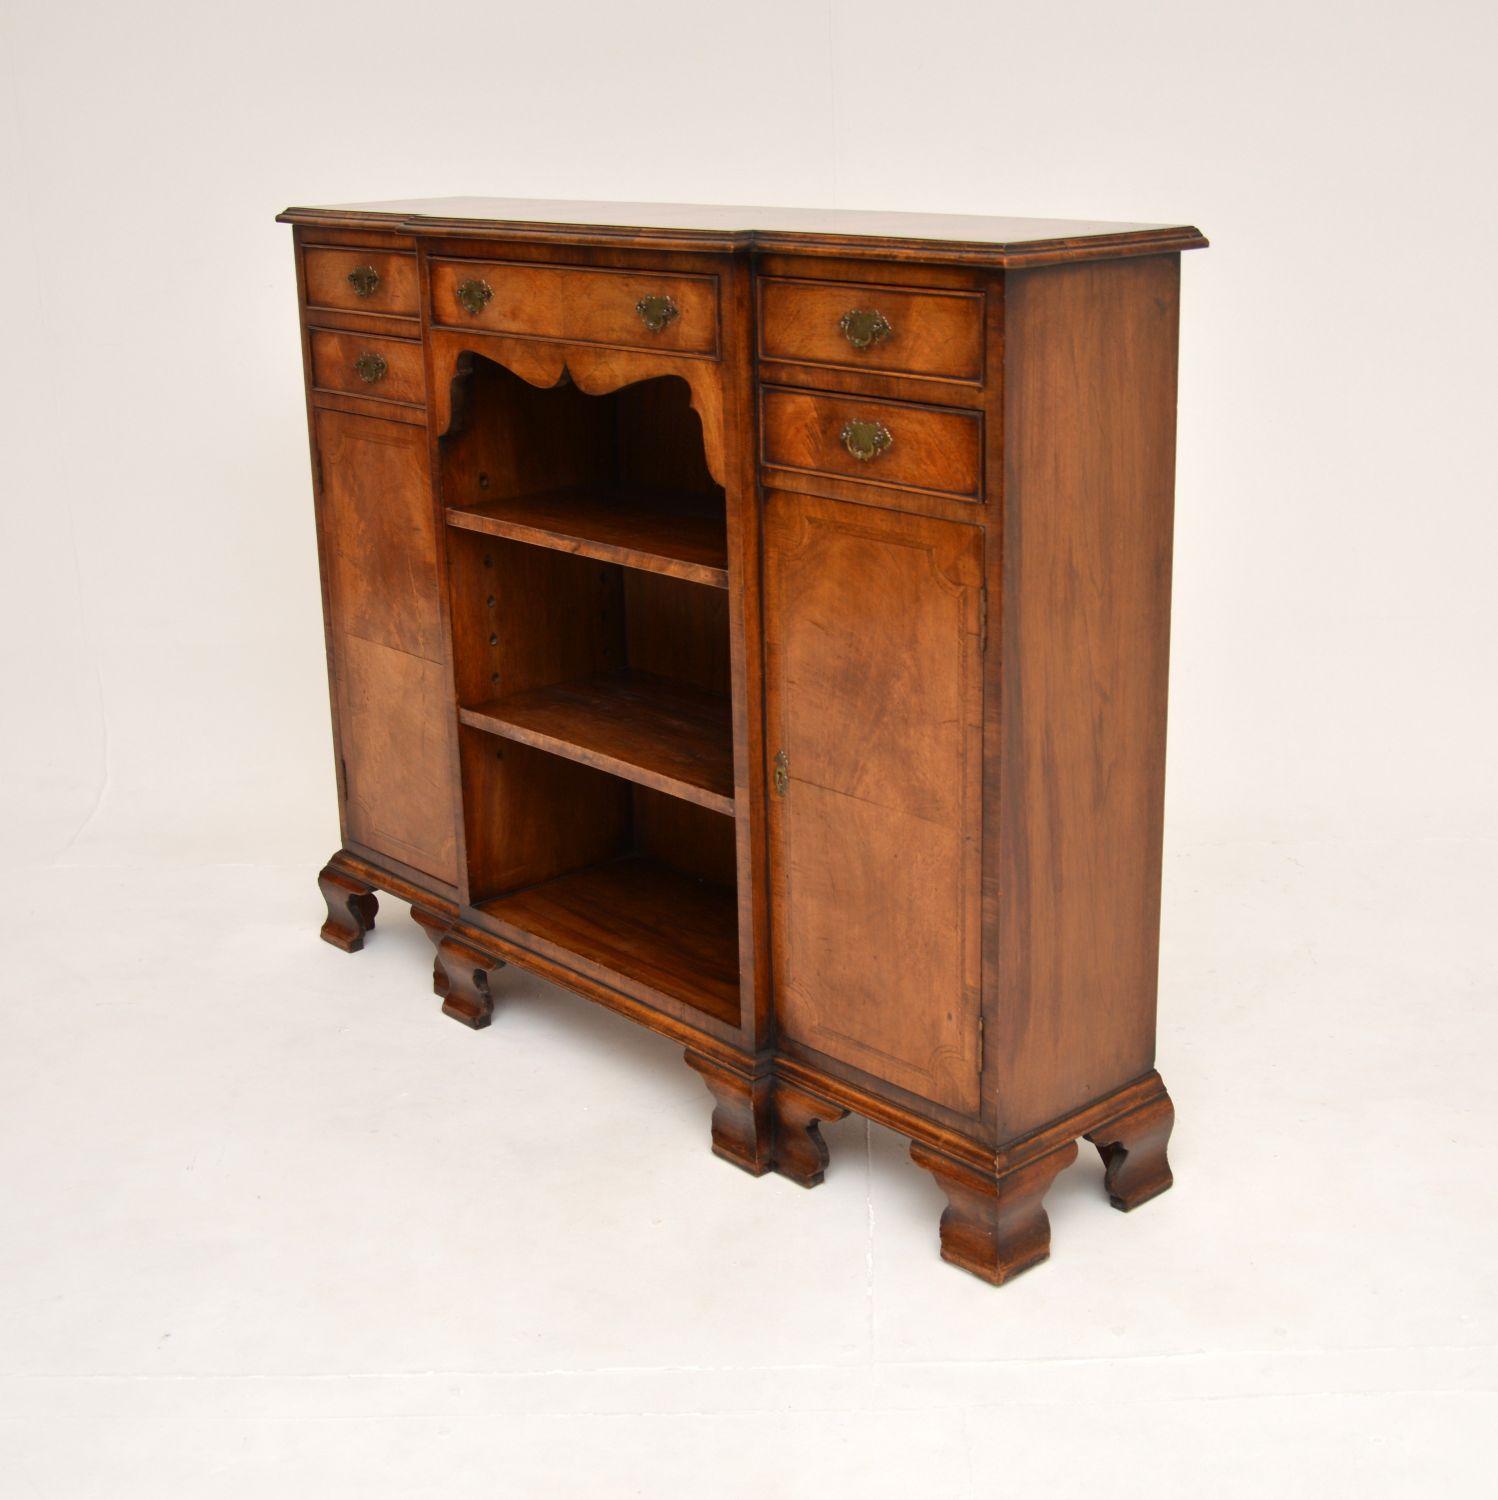 Early 20th Century Antique Inlaid Walnut Breakfront Bookcase For Sale